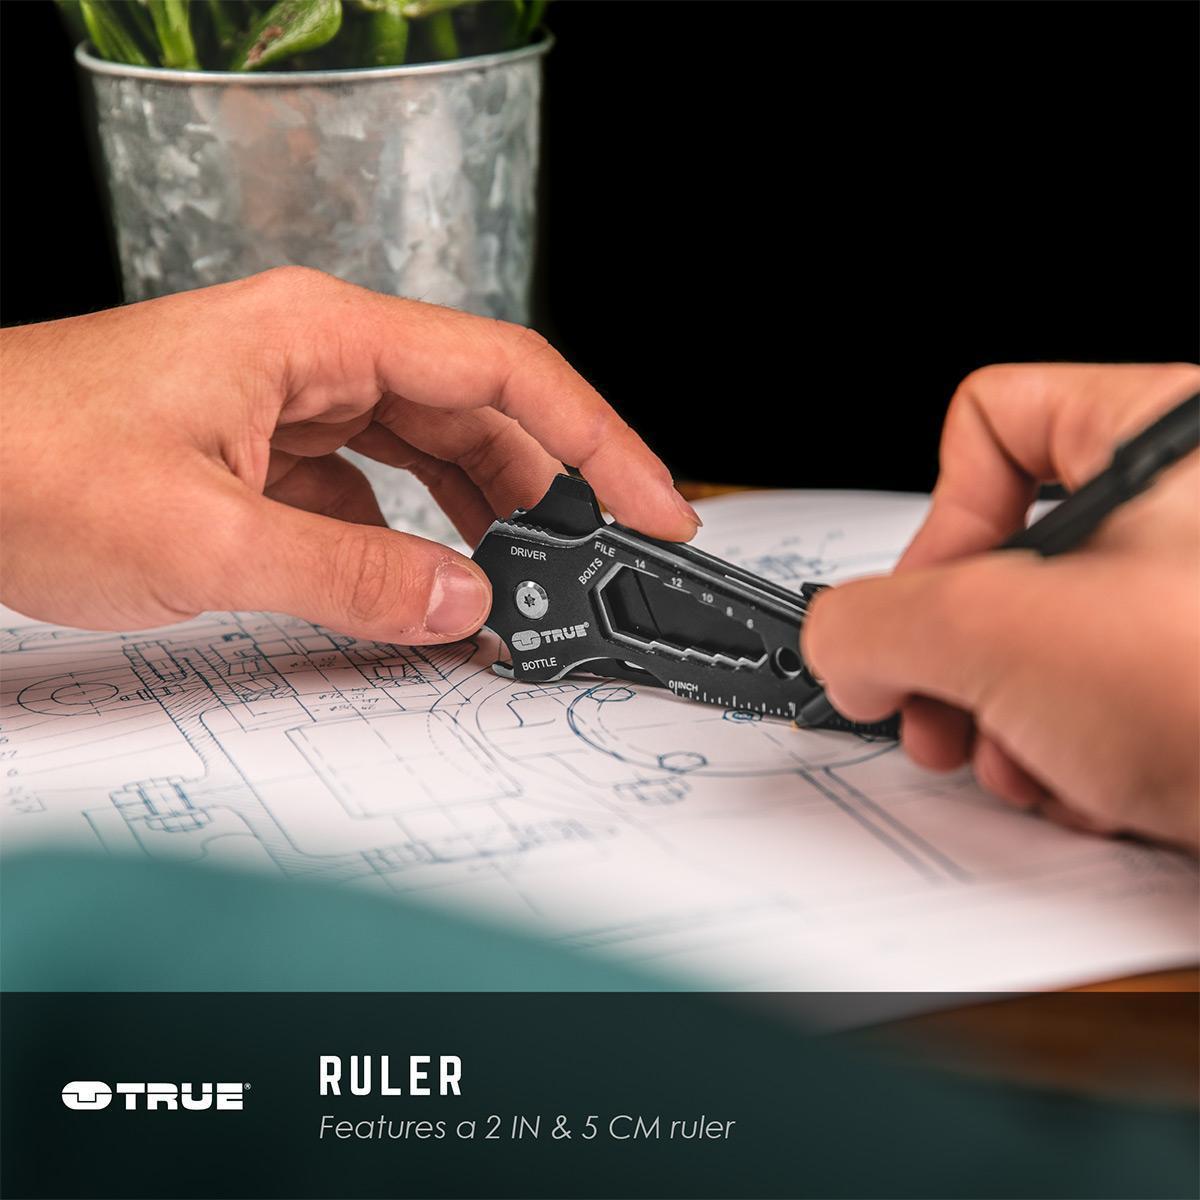 Smart Knife 15-in-1 Multi-Tool Wrapped Around a Pocket Knife